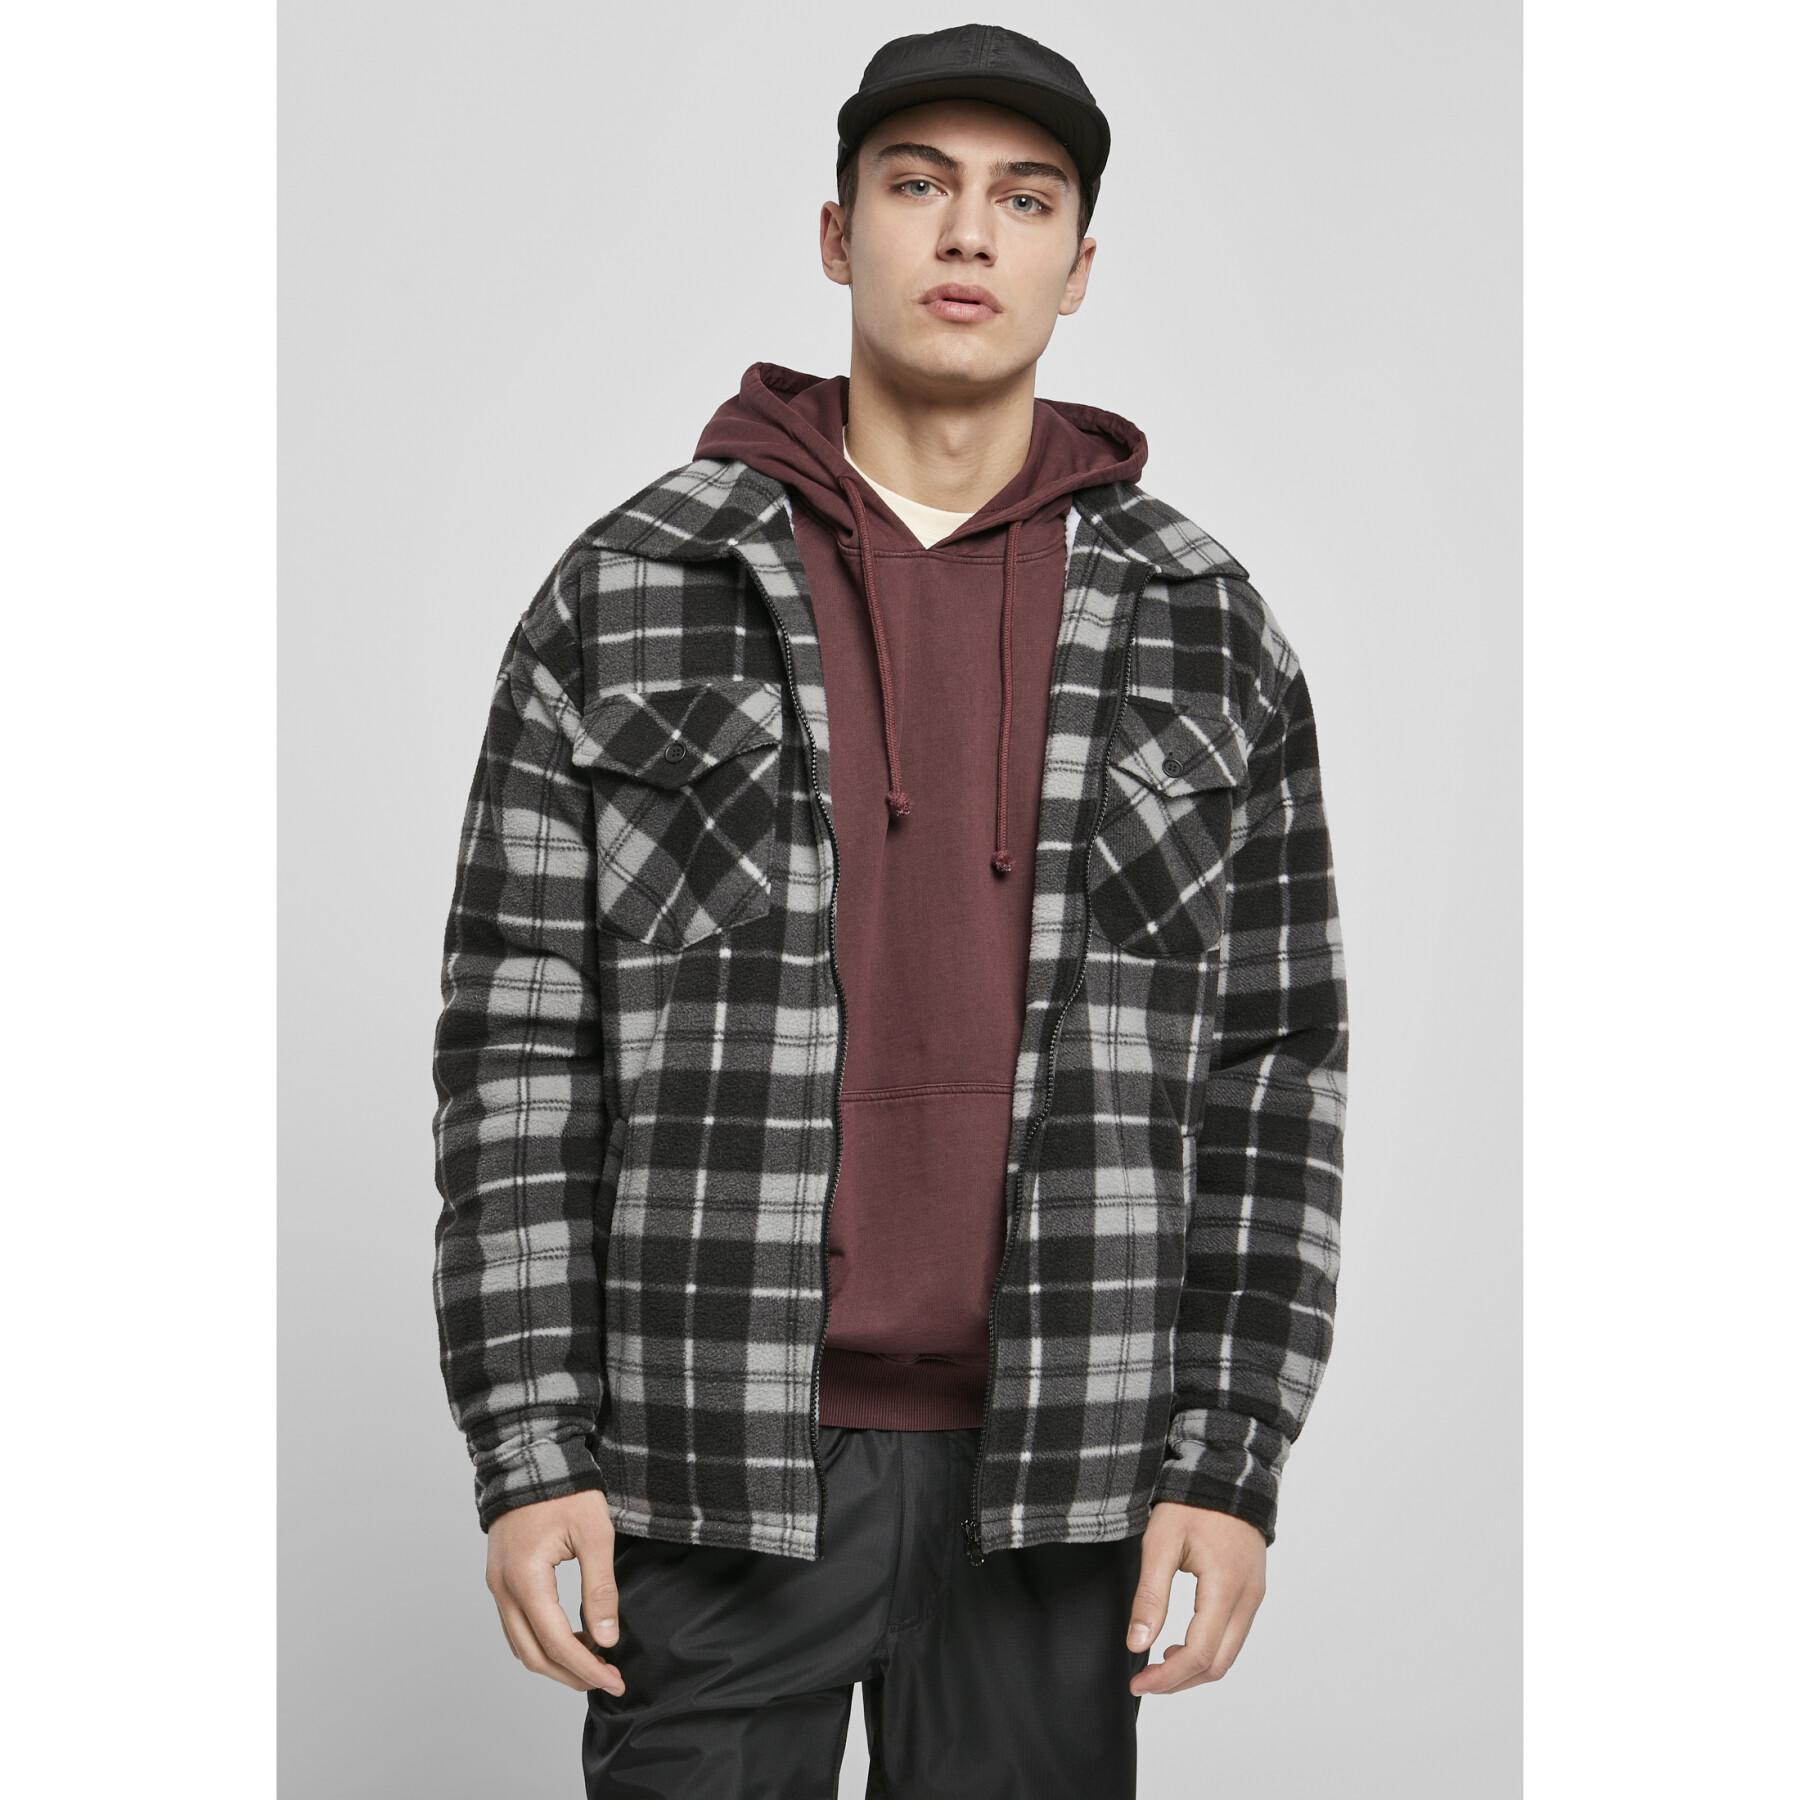 Jacke Urban Classics plaid teddy lined-grandes tailles